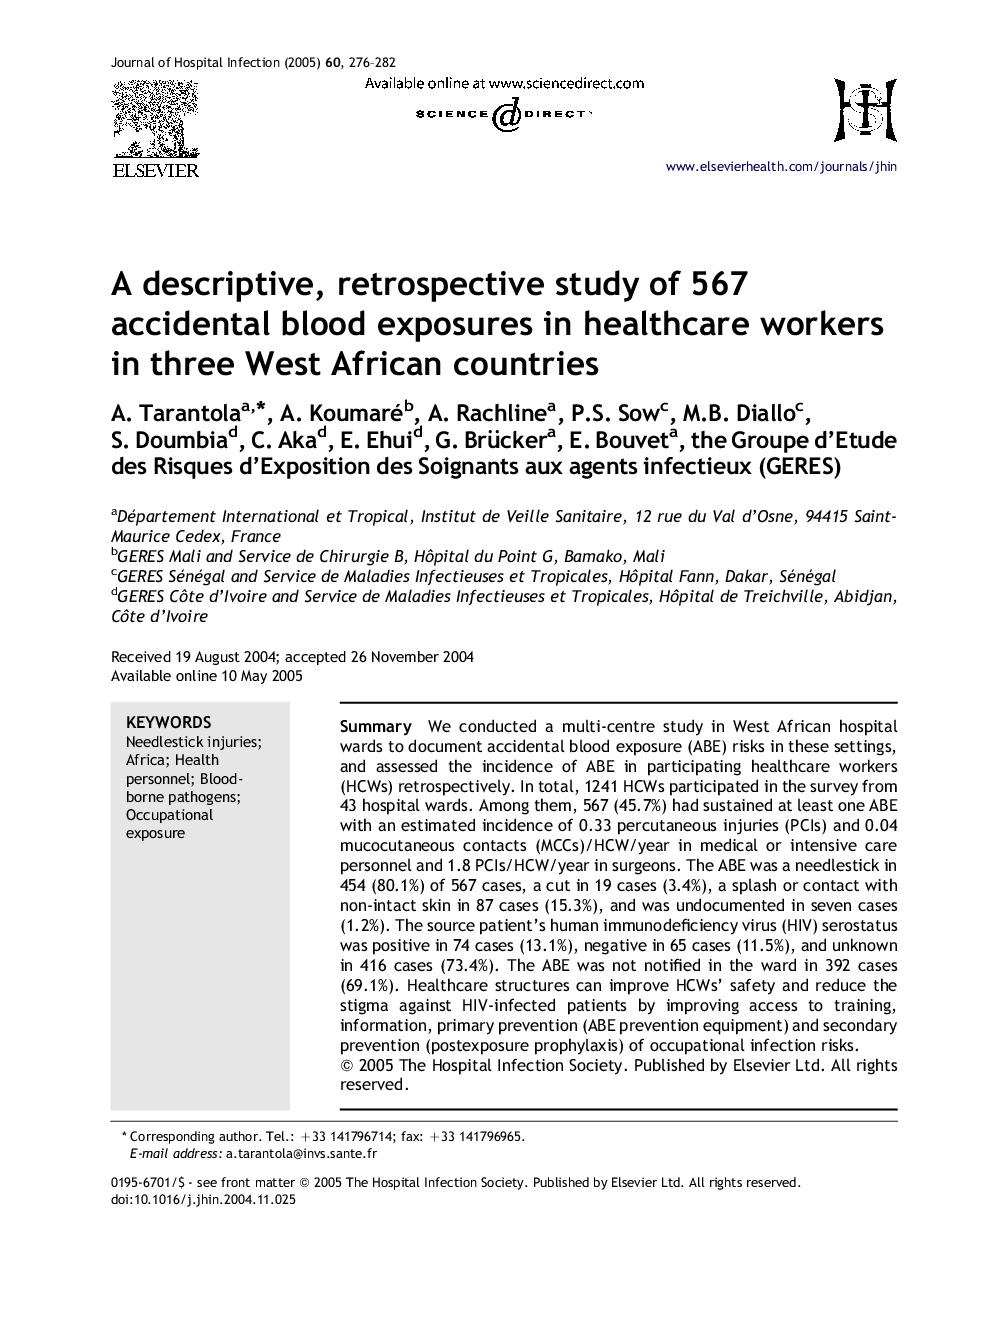 A descriptive, retrospective study of 567 accidental blood exposures in healthcare workers in three West African countries